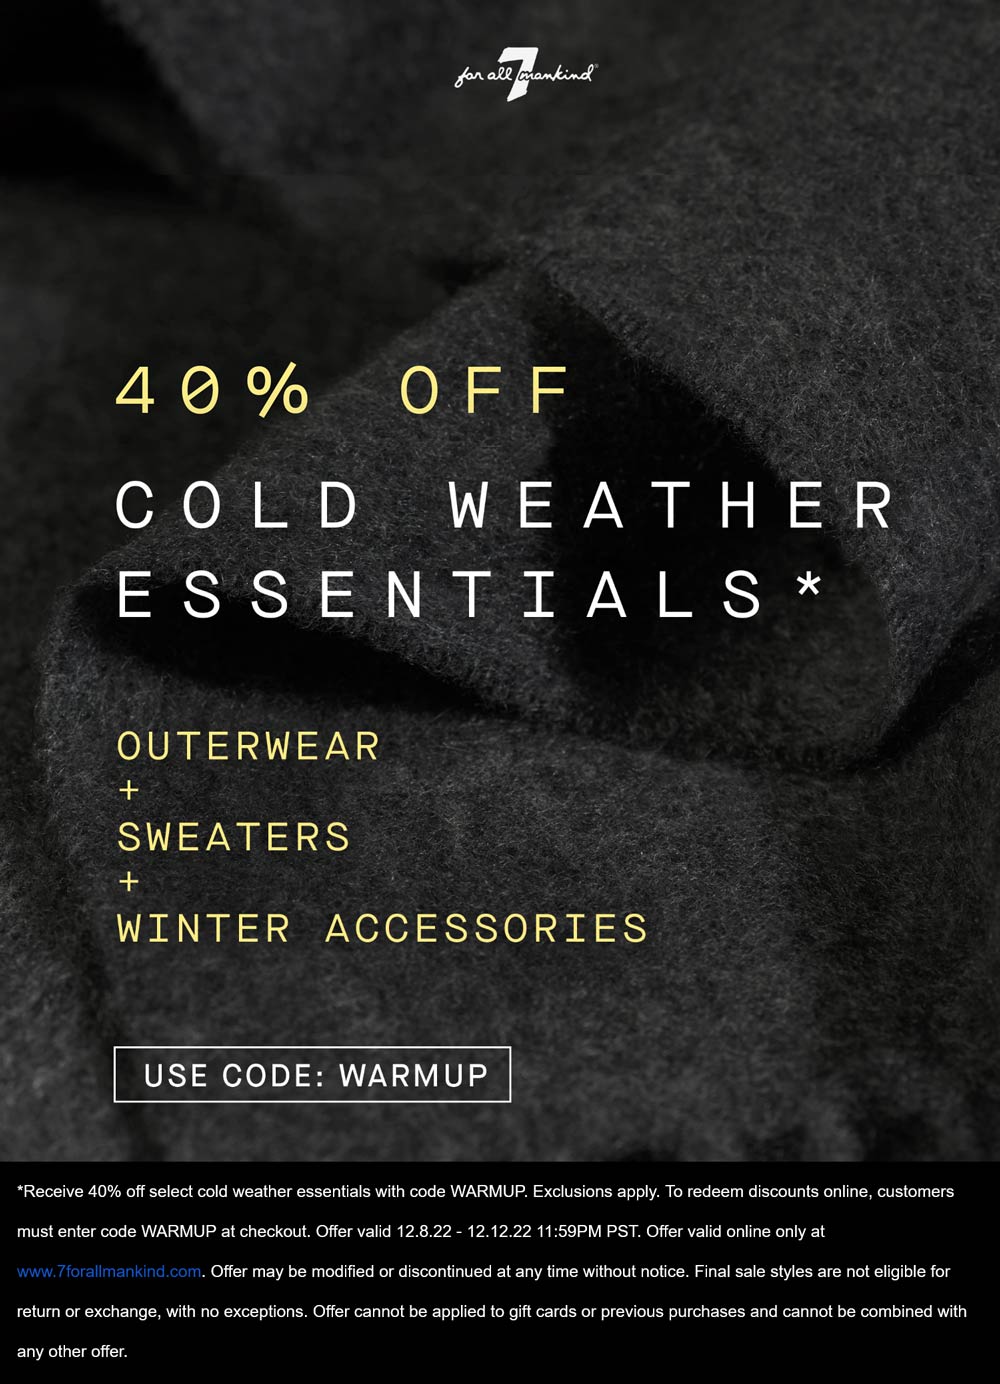 7 for all Mankind stores Coupon  40% off cold weather today at 7 for all Mankind via promo code WARMUP #7forallmankind 